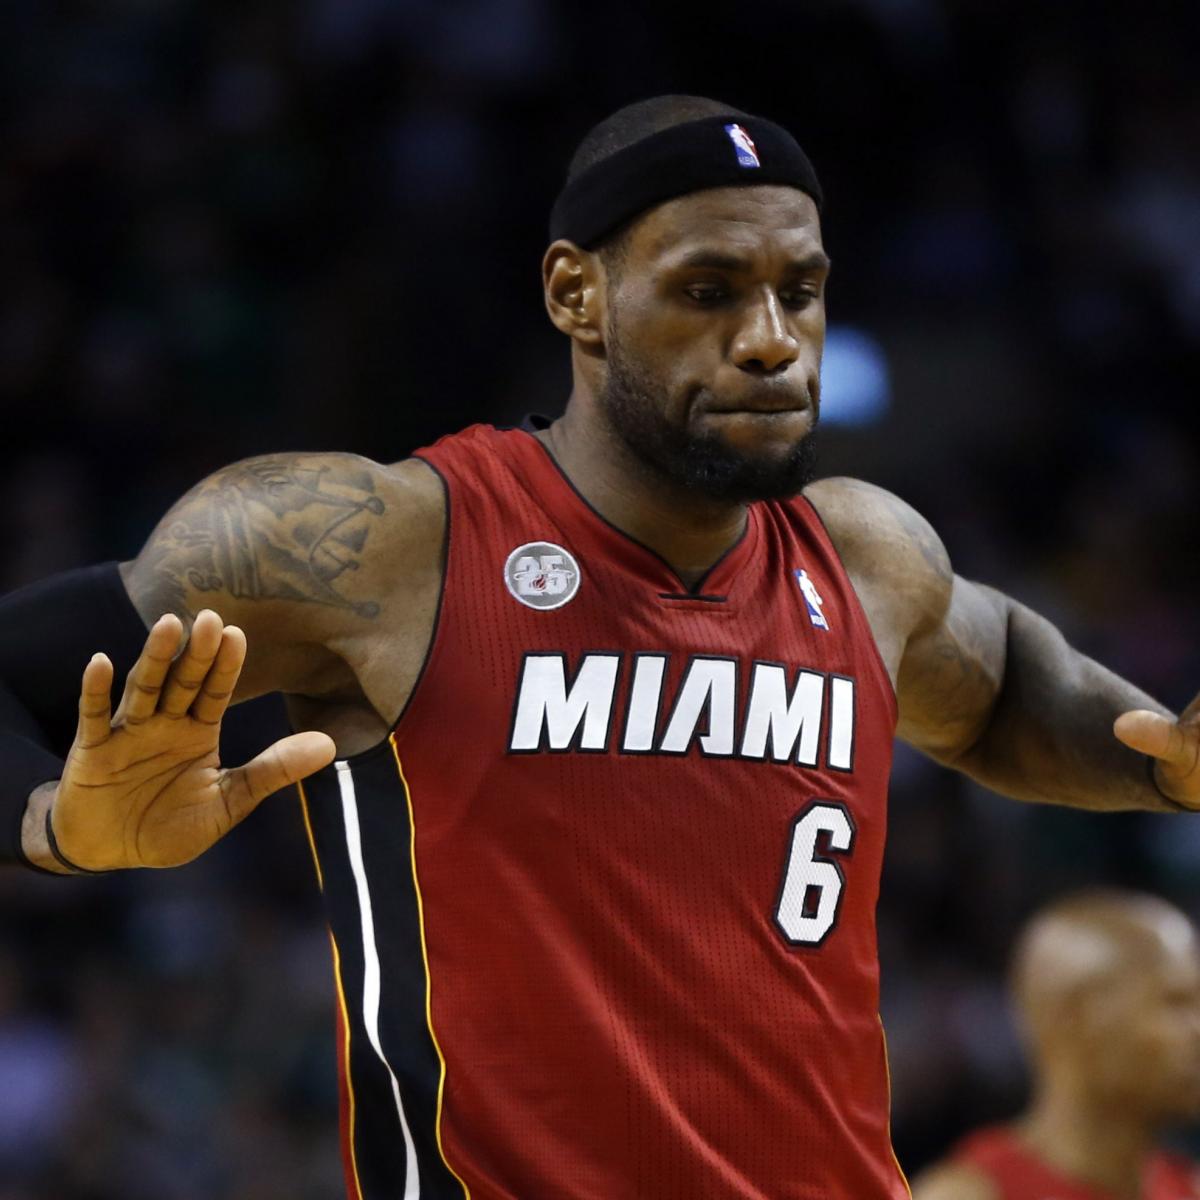 NBA PLAYOFFS: LeBron scores 45 to lead Miami in rout of Celtics